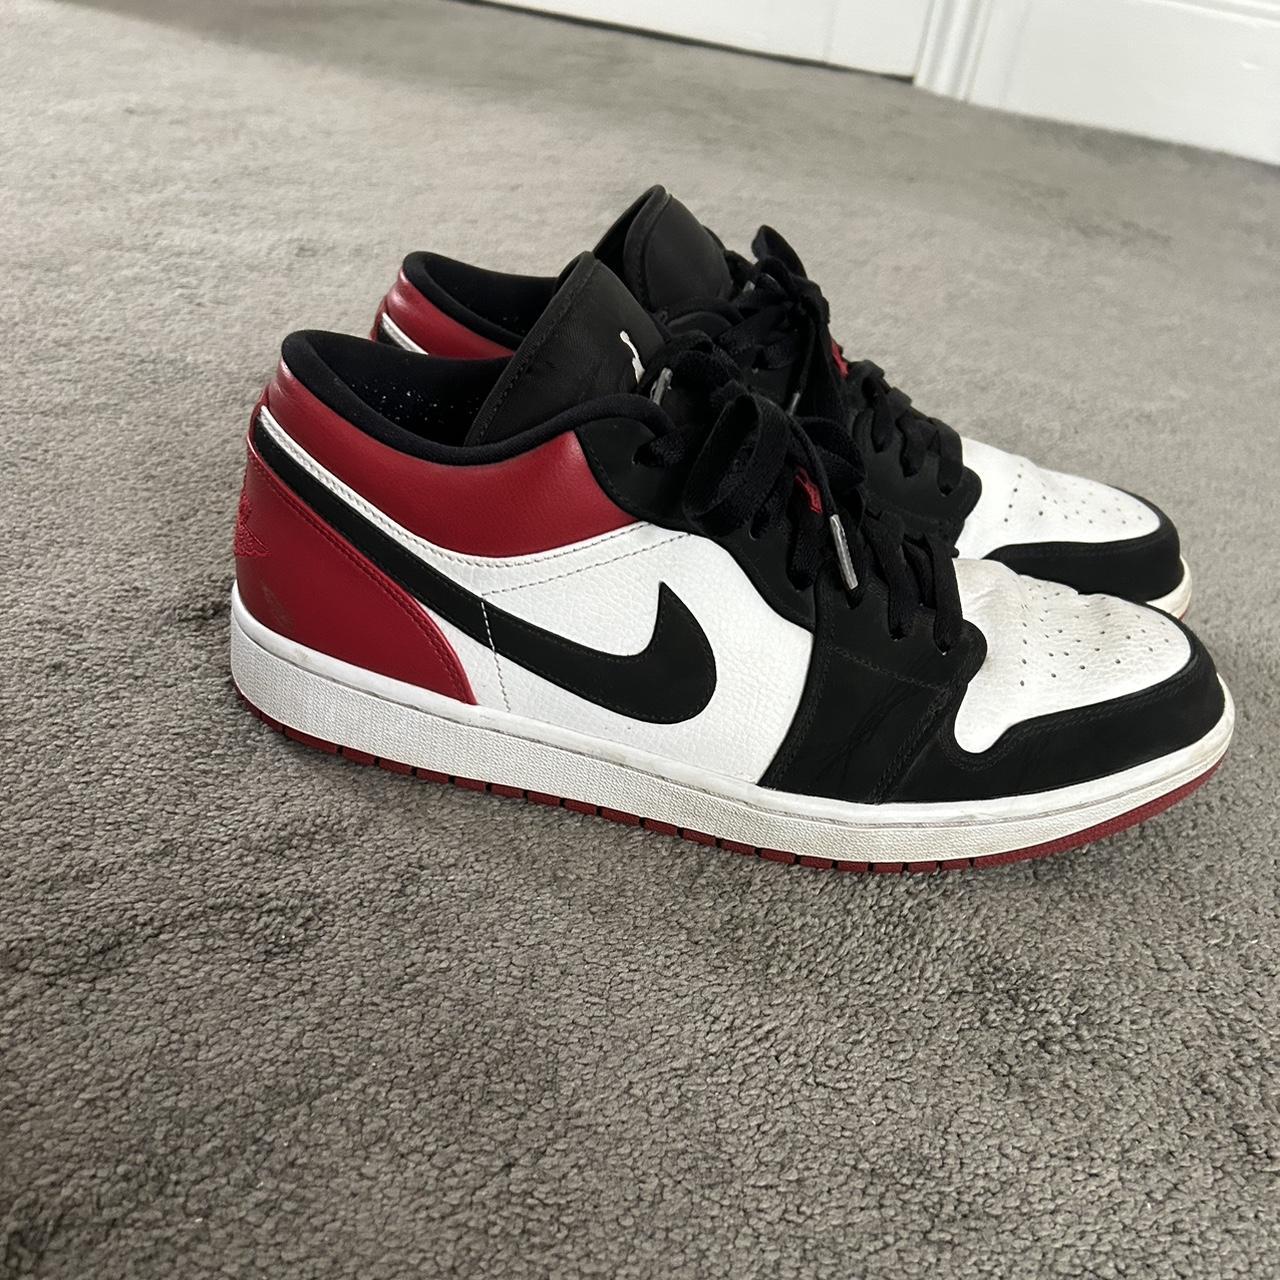 Nike Men's Black and Red Trainers | Depop